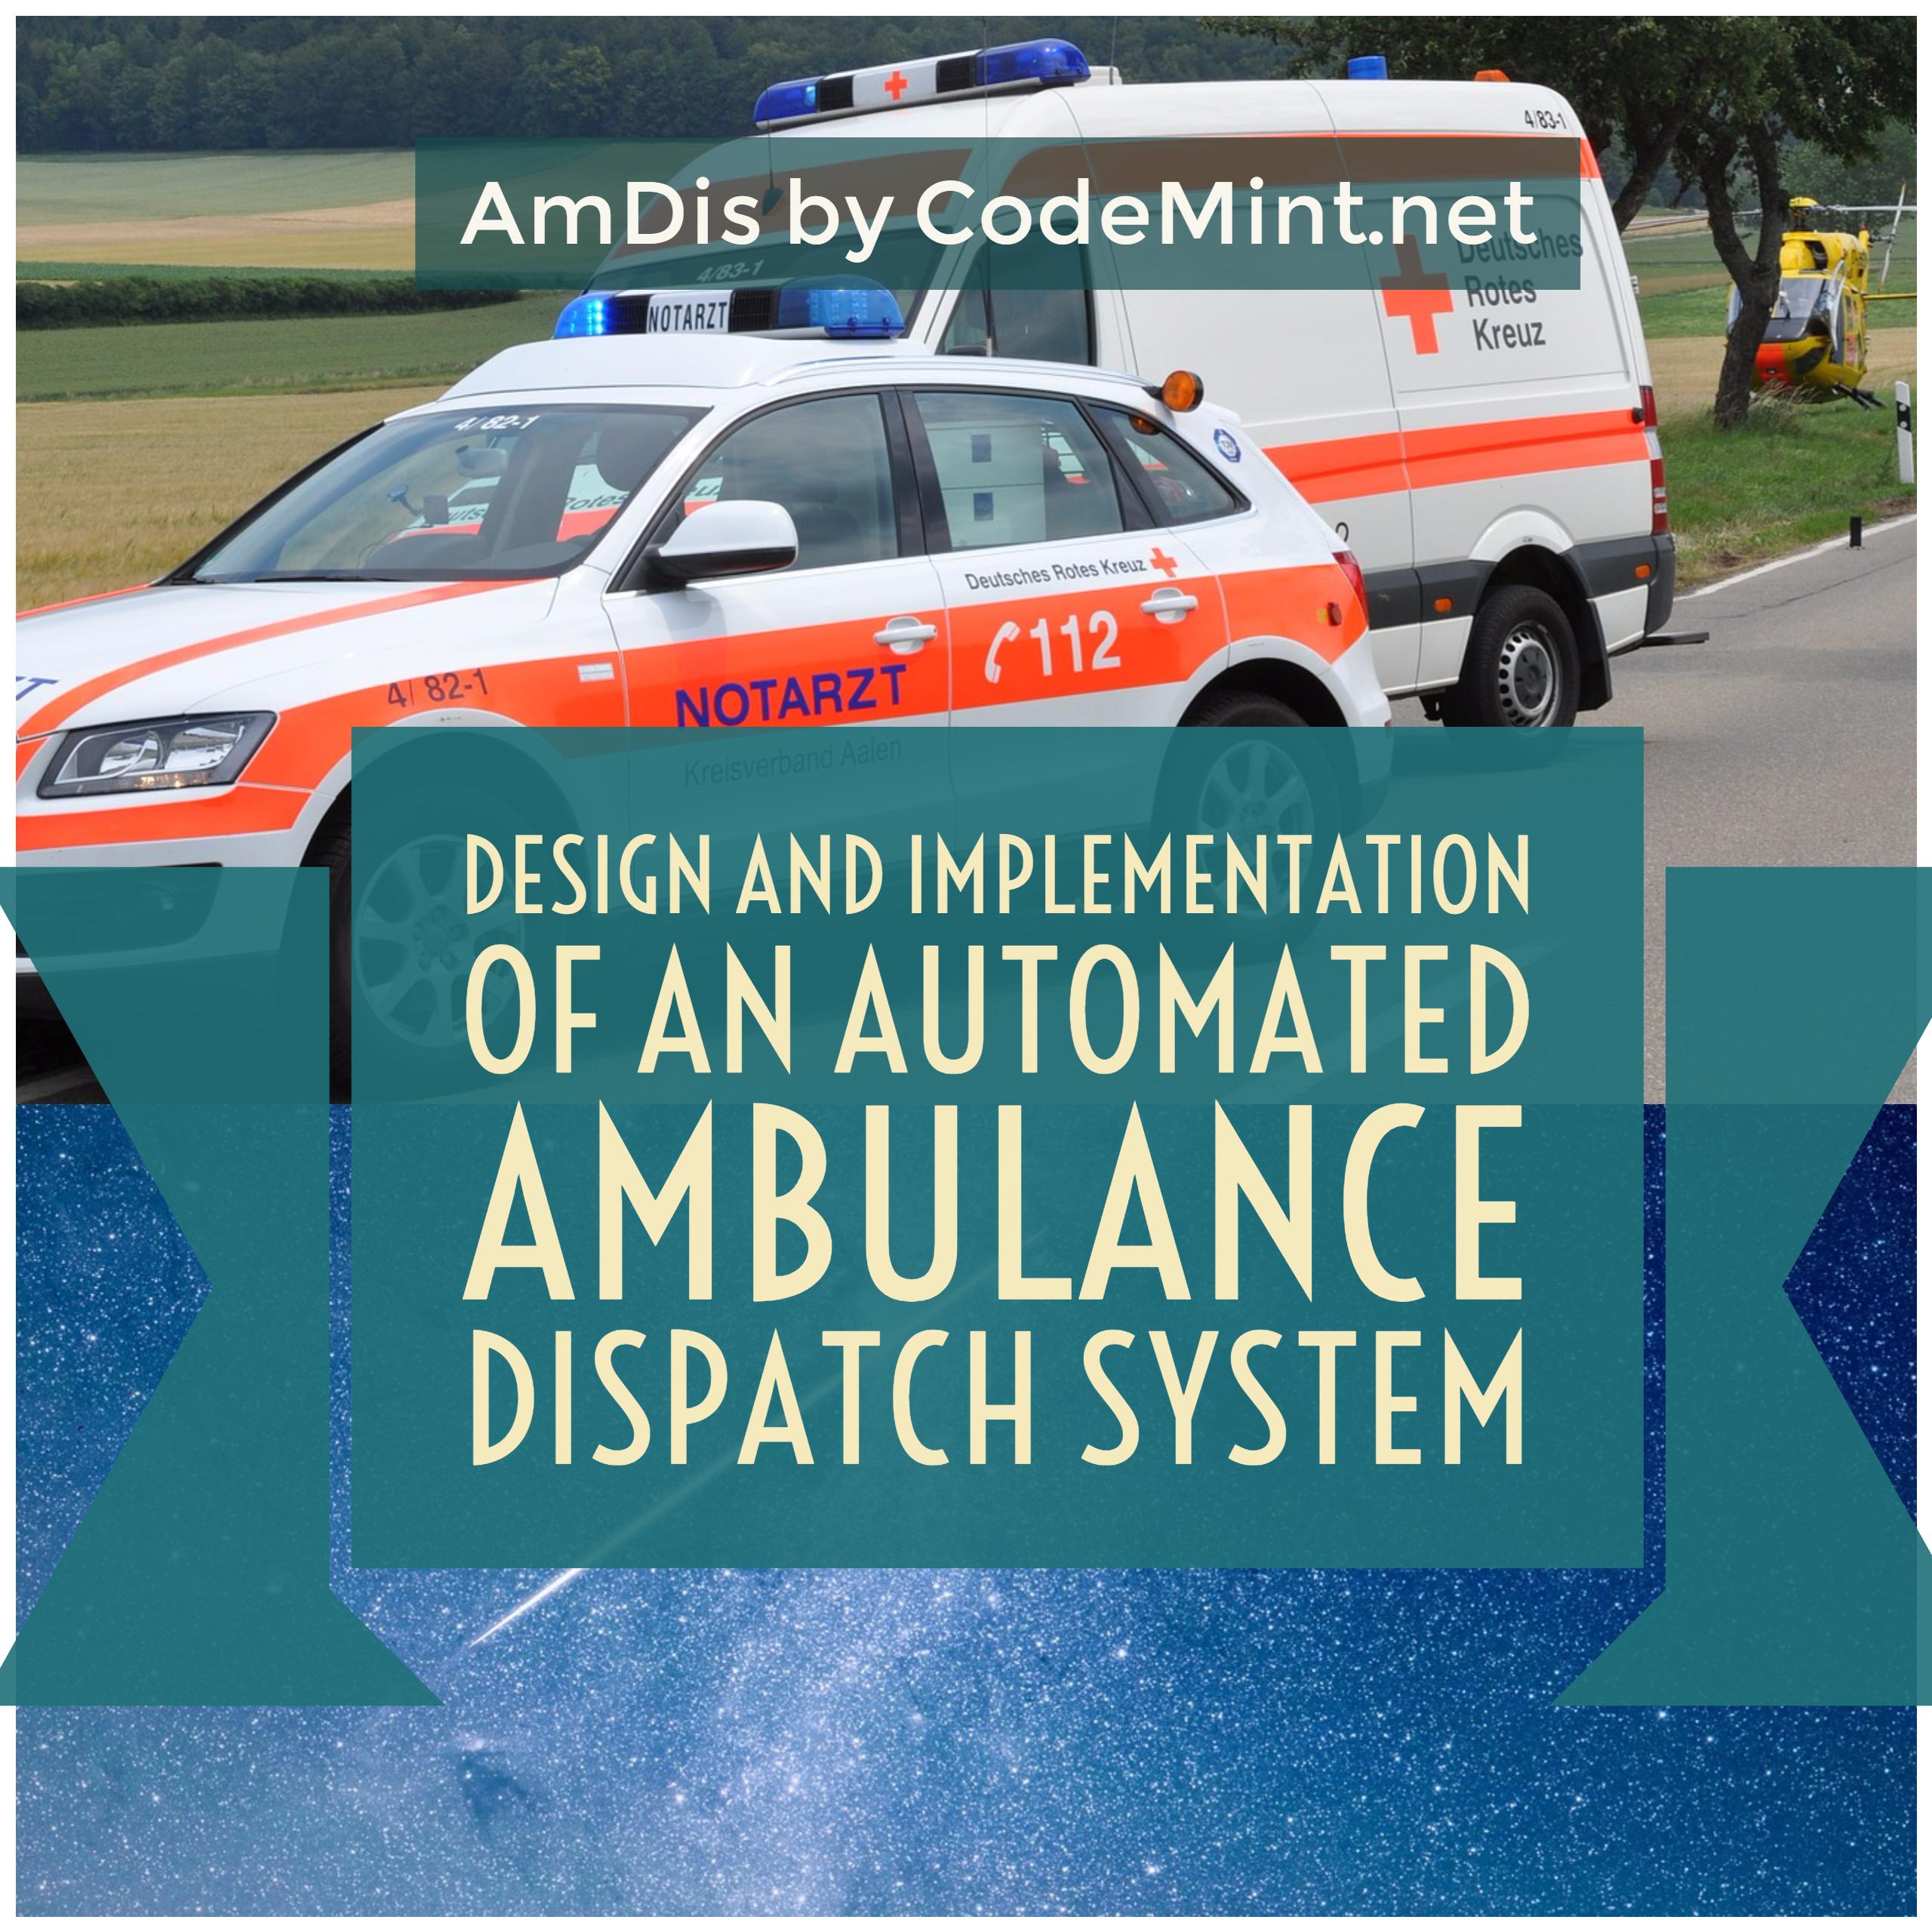 AmDis - Design and Implementation of an Automated Ambulance Dispatch System